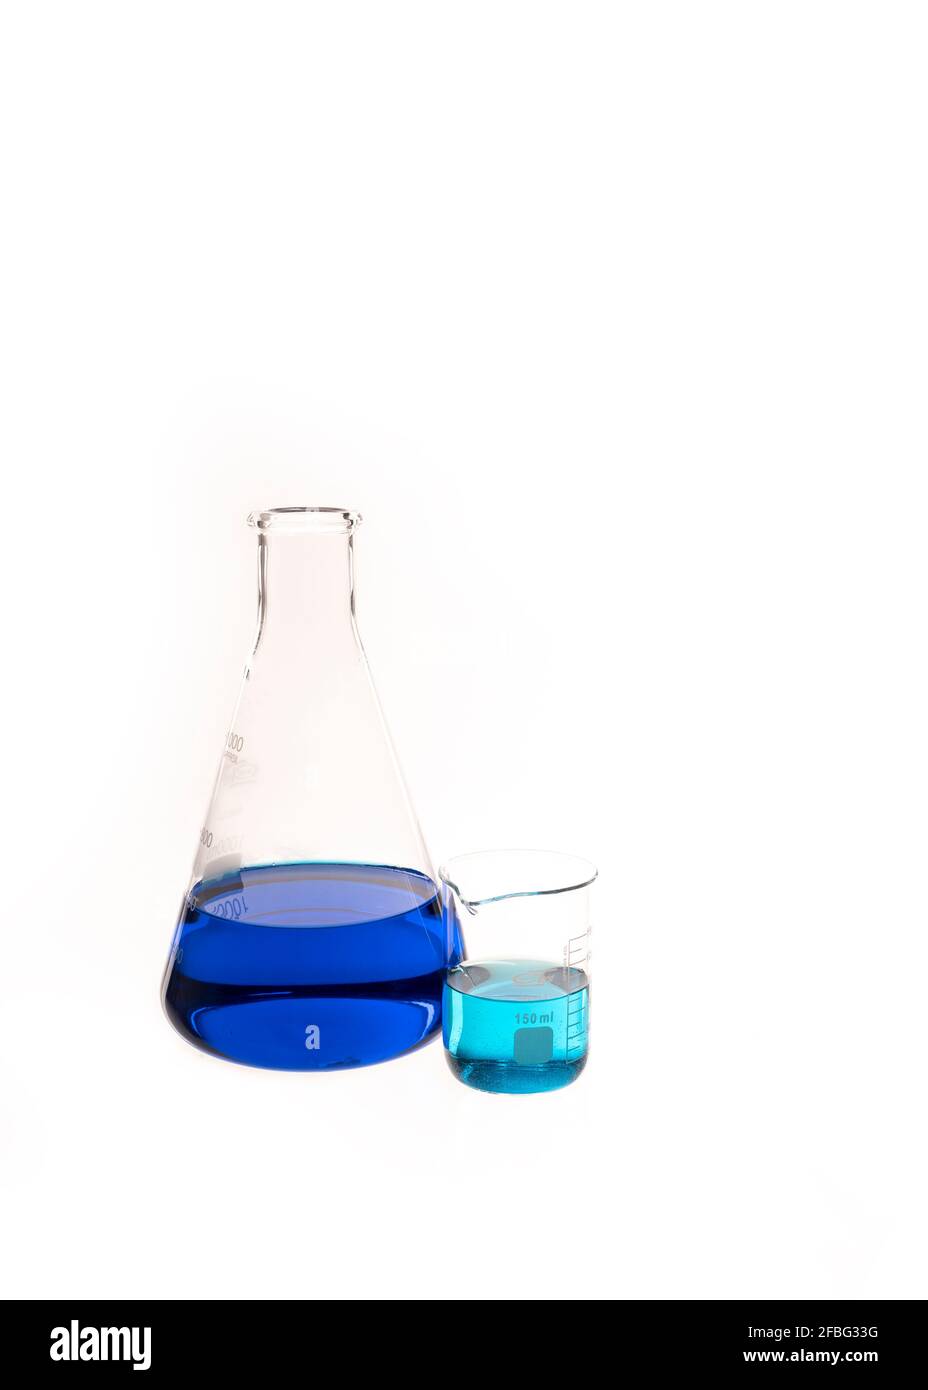 Conical flat flask and Berzelius Beaker filled with colorful blue and teal liquid. Chemistry research and lab instruments with copy space available Stock Photo